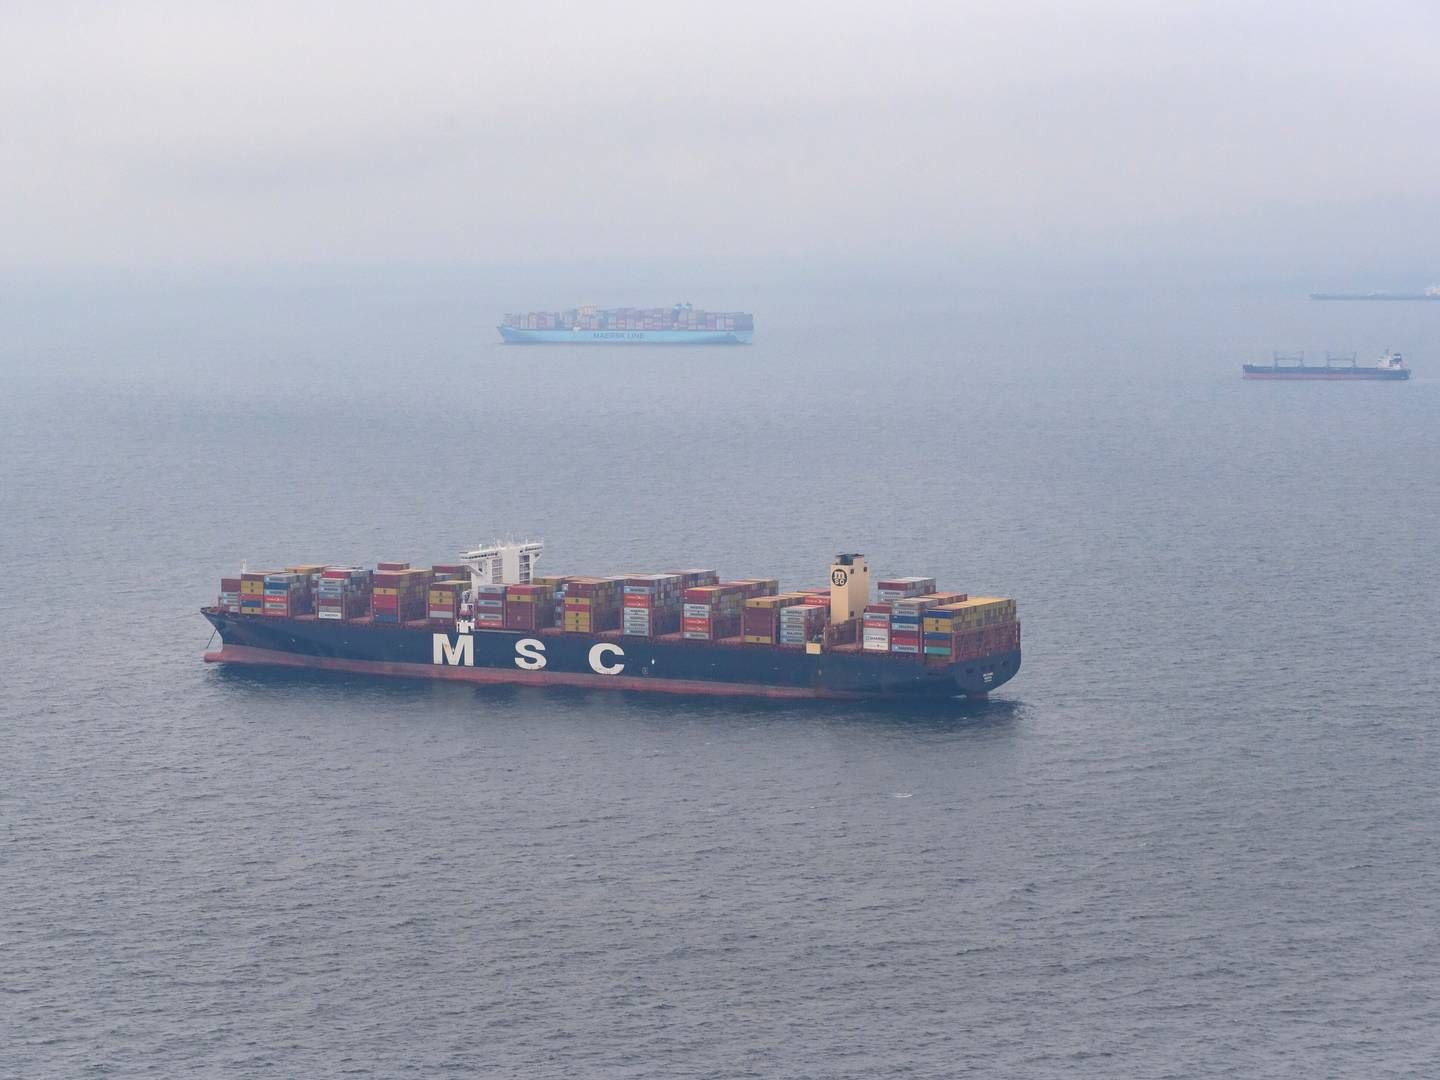 The world's largest container shipping company, MSC, achieved a slightly better schedule reliability than rival Maersk in August.